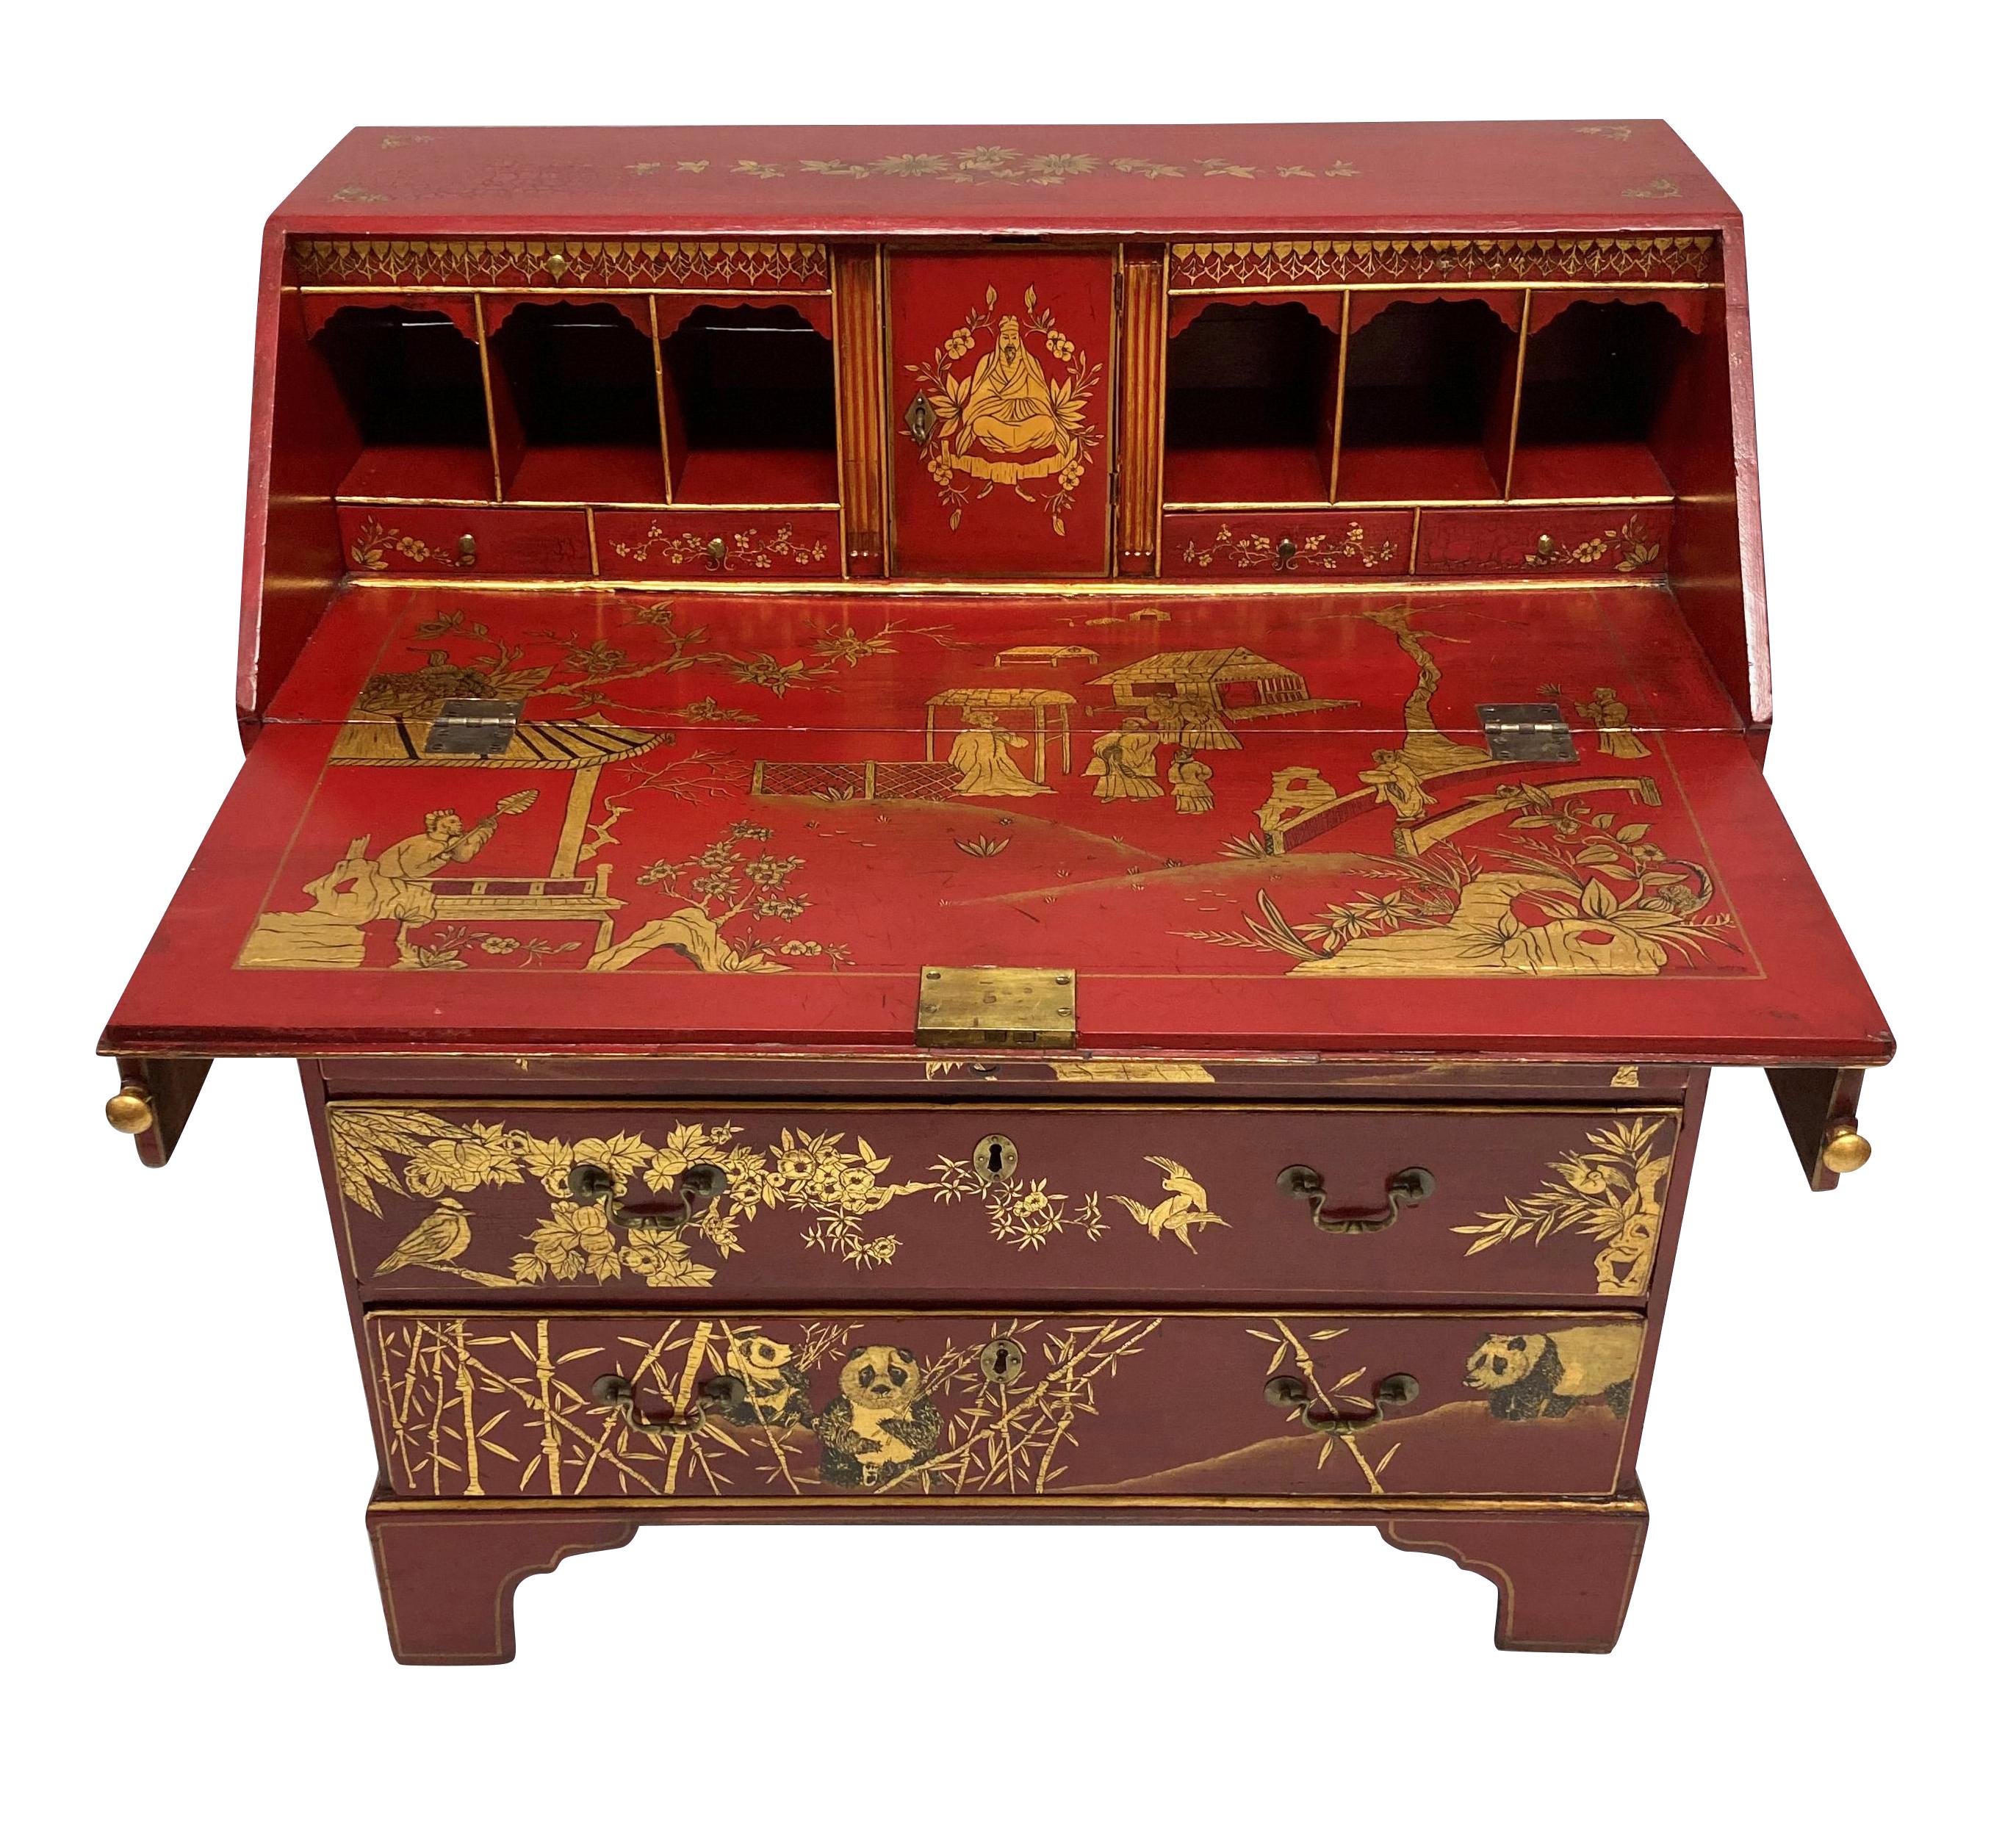 A English George III scarlet gilt-japanned desk; superbly, later decorated with rich gilt chinoiserie on a scarlet lacquered background, the fall-front opening to reveal a similarly decorated writing slide and various pigeon-holes and drawers; above